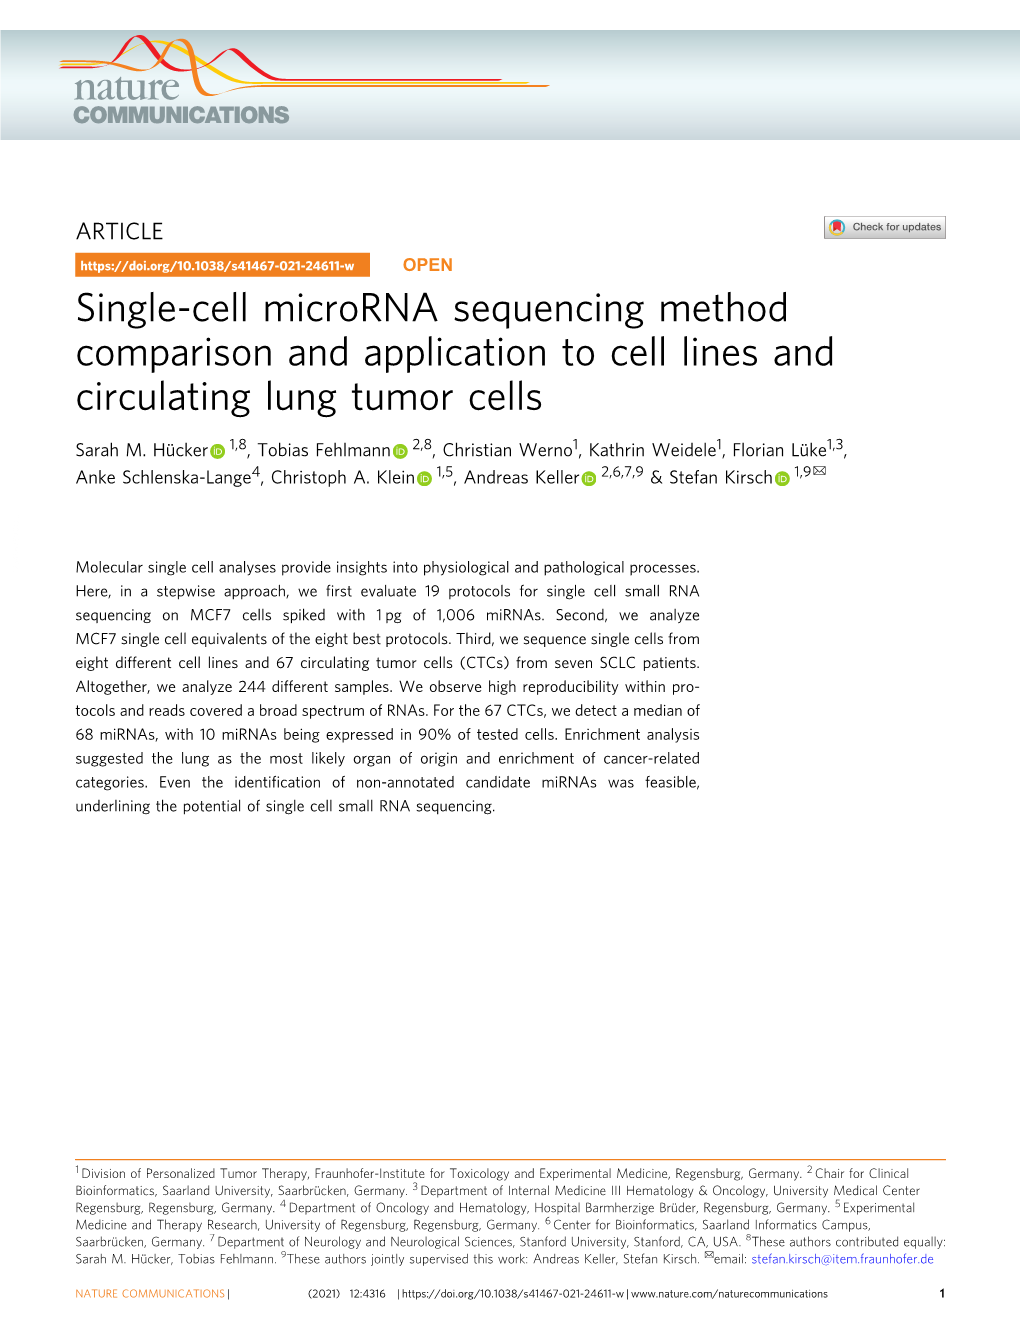 Single-Cell Microrna Sequencing Method Comparison and Application to Cell Lines and Circulating Lung Tumor Cells